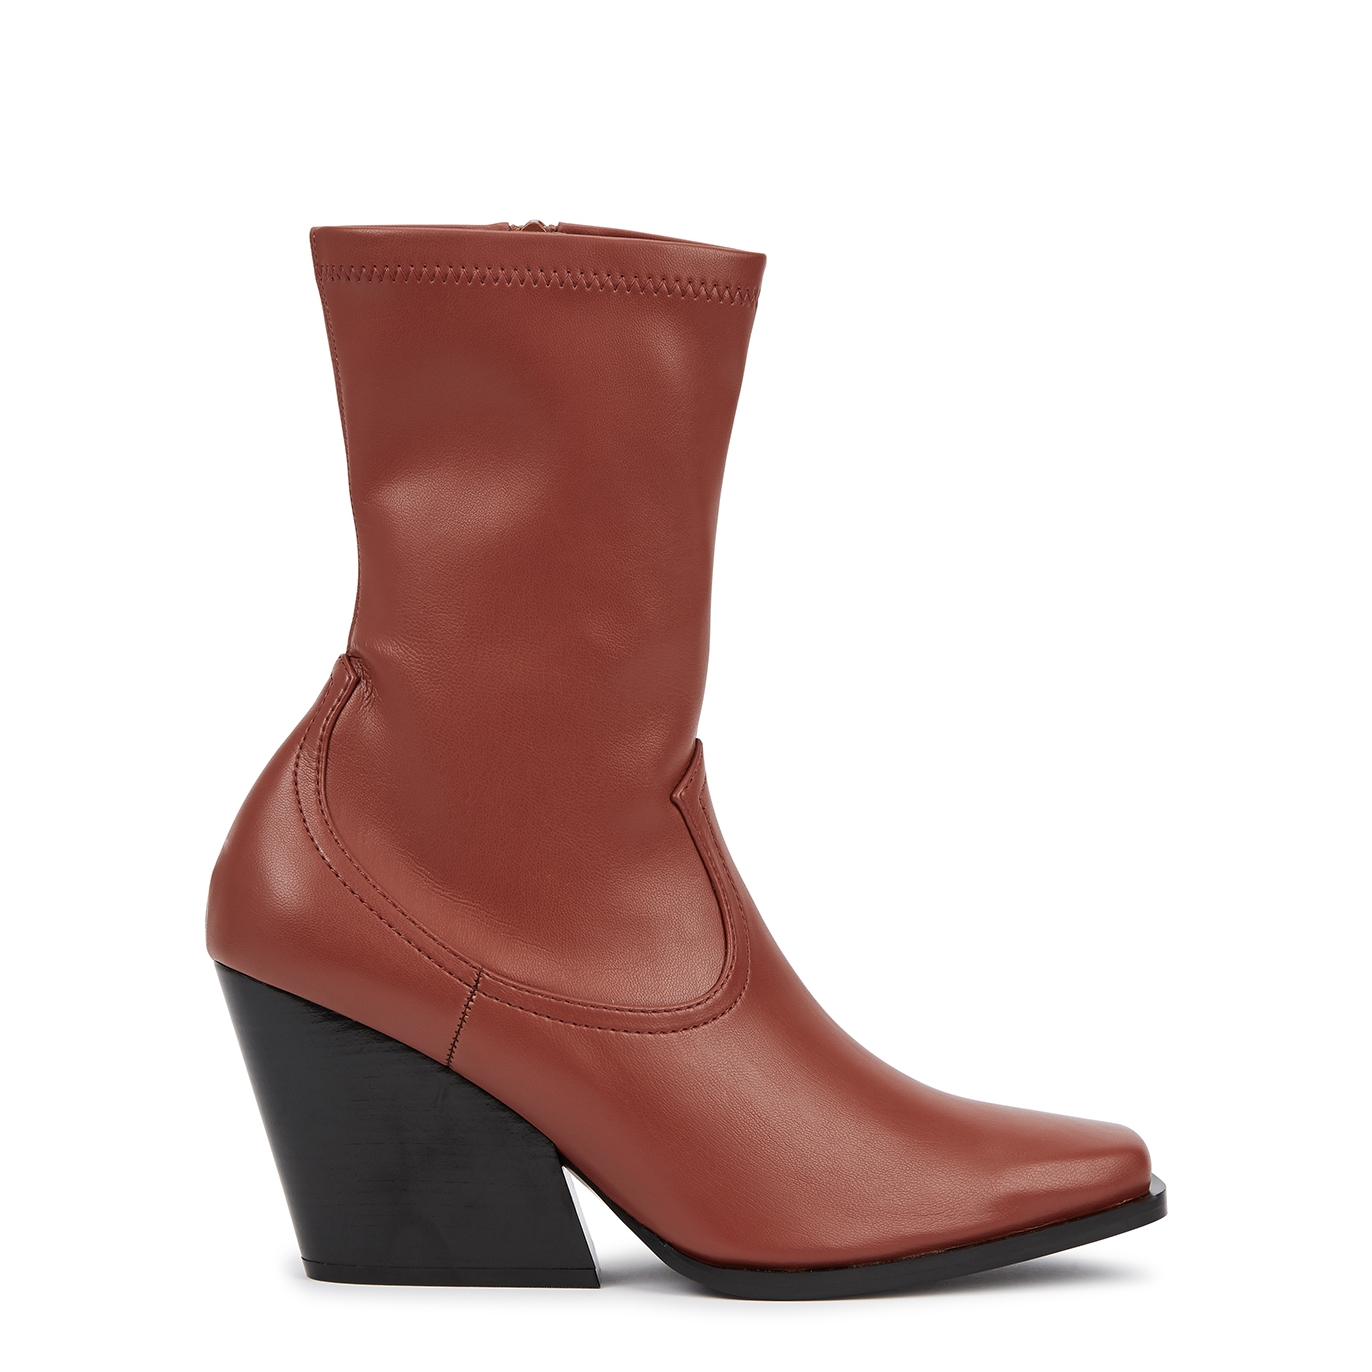 Stella McCartney 90 Red Faux Leather Ankle Boots - Brown - 5